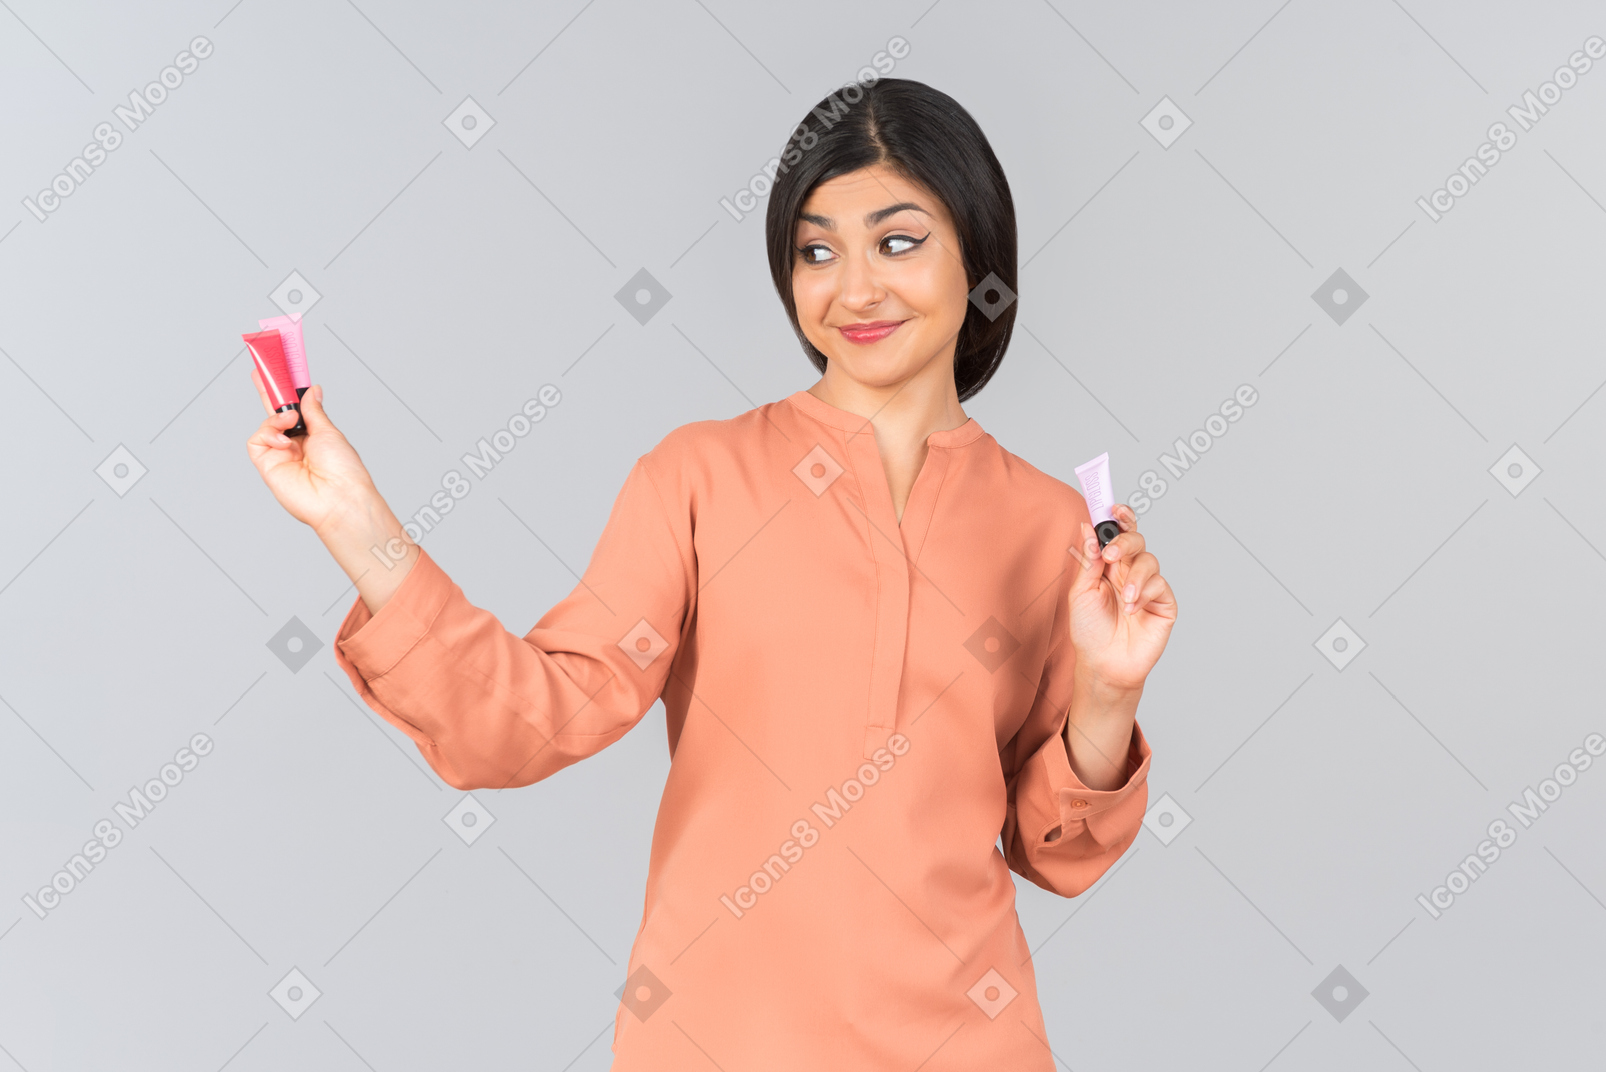 Indian woman comparing lip balms she's holding